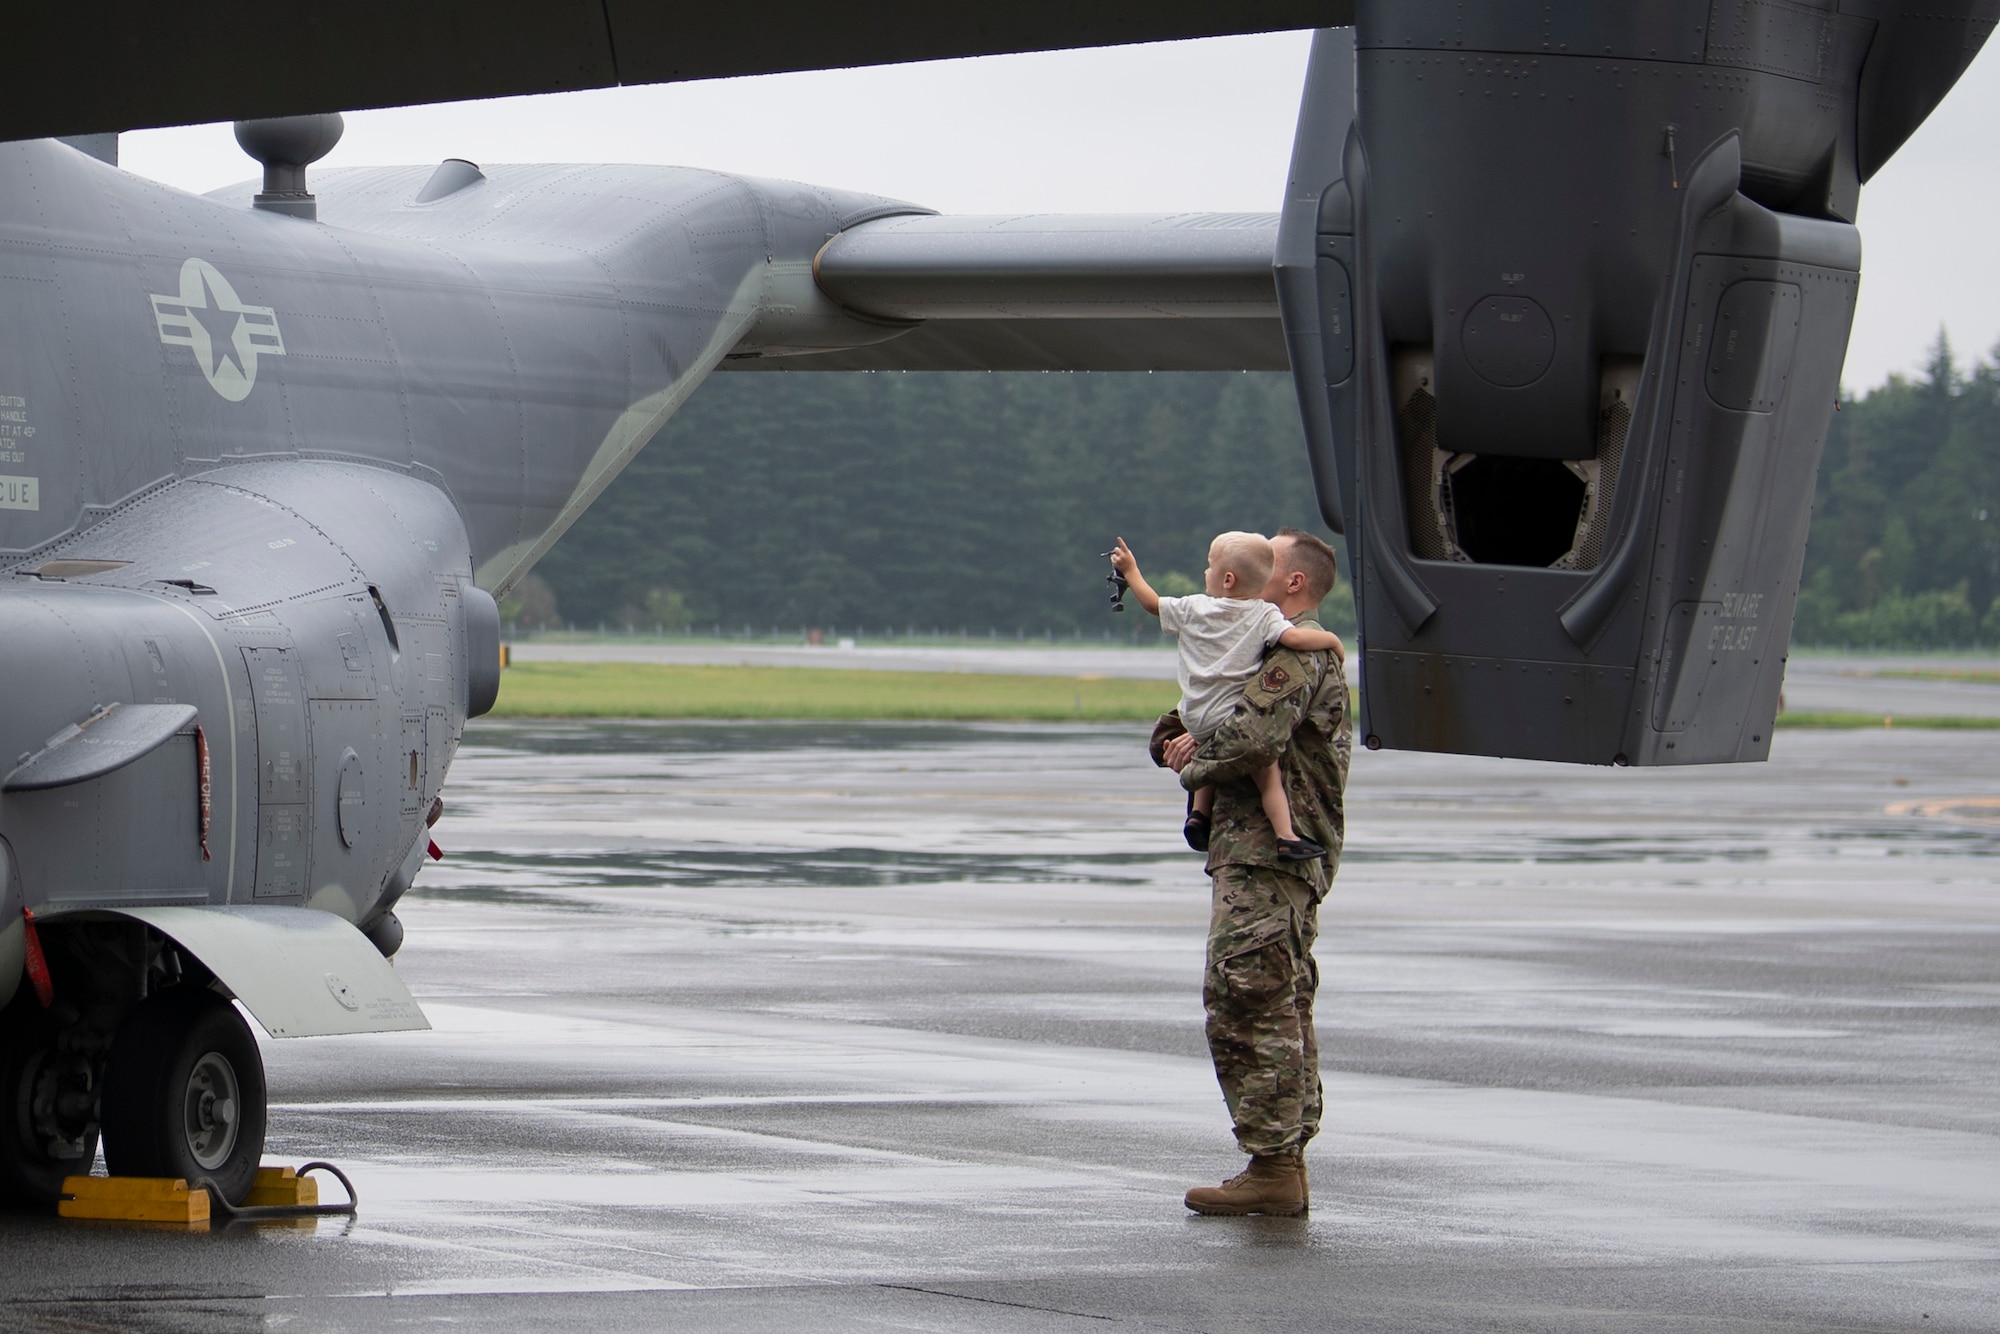 An Airman from Team Yokota looks at a CV-22 Osprey with his child during the assumption of command ceremony at Yokota Air Base, Japan, July 1, 2019.